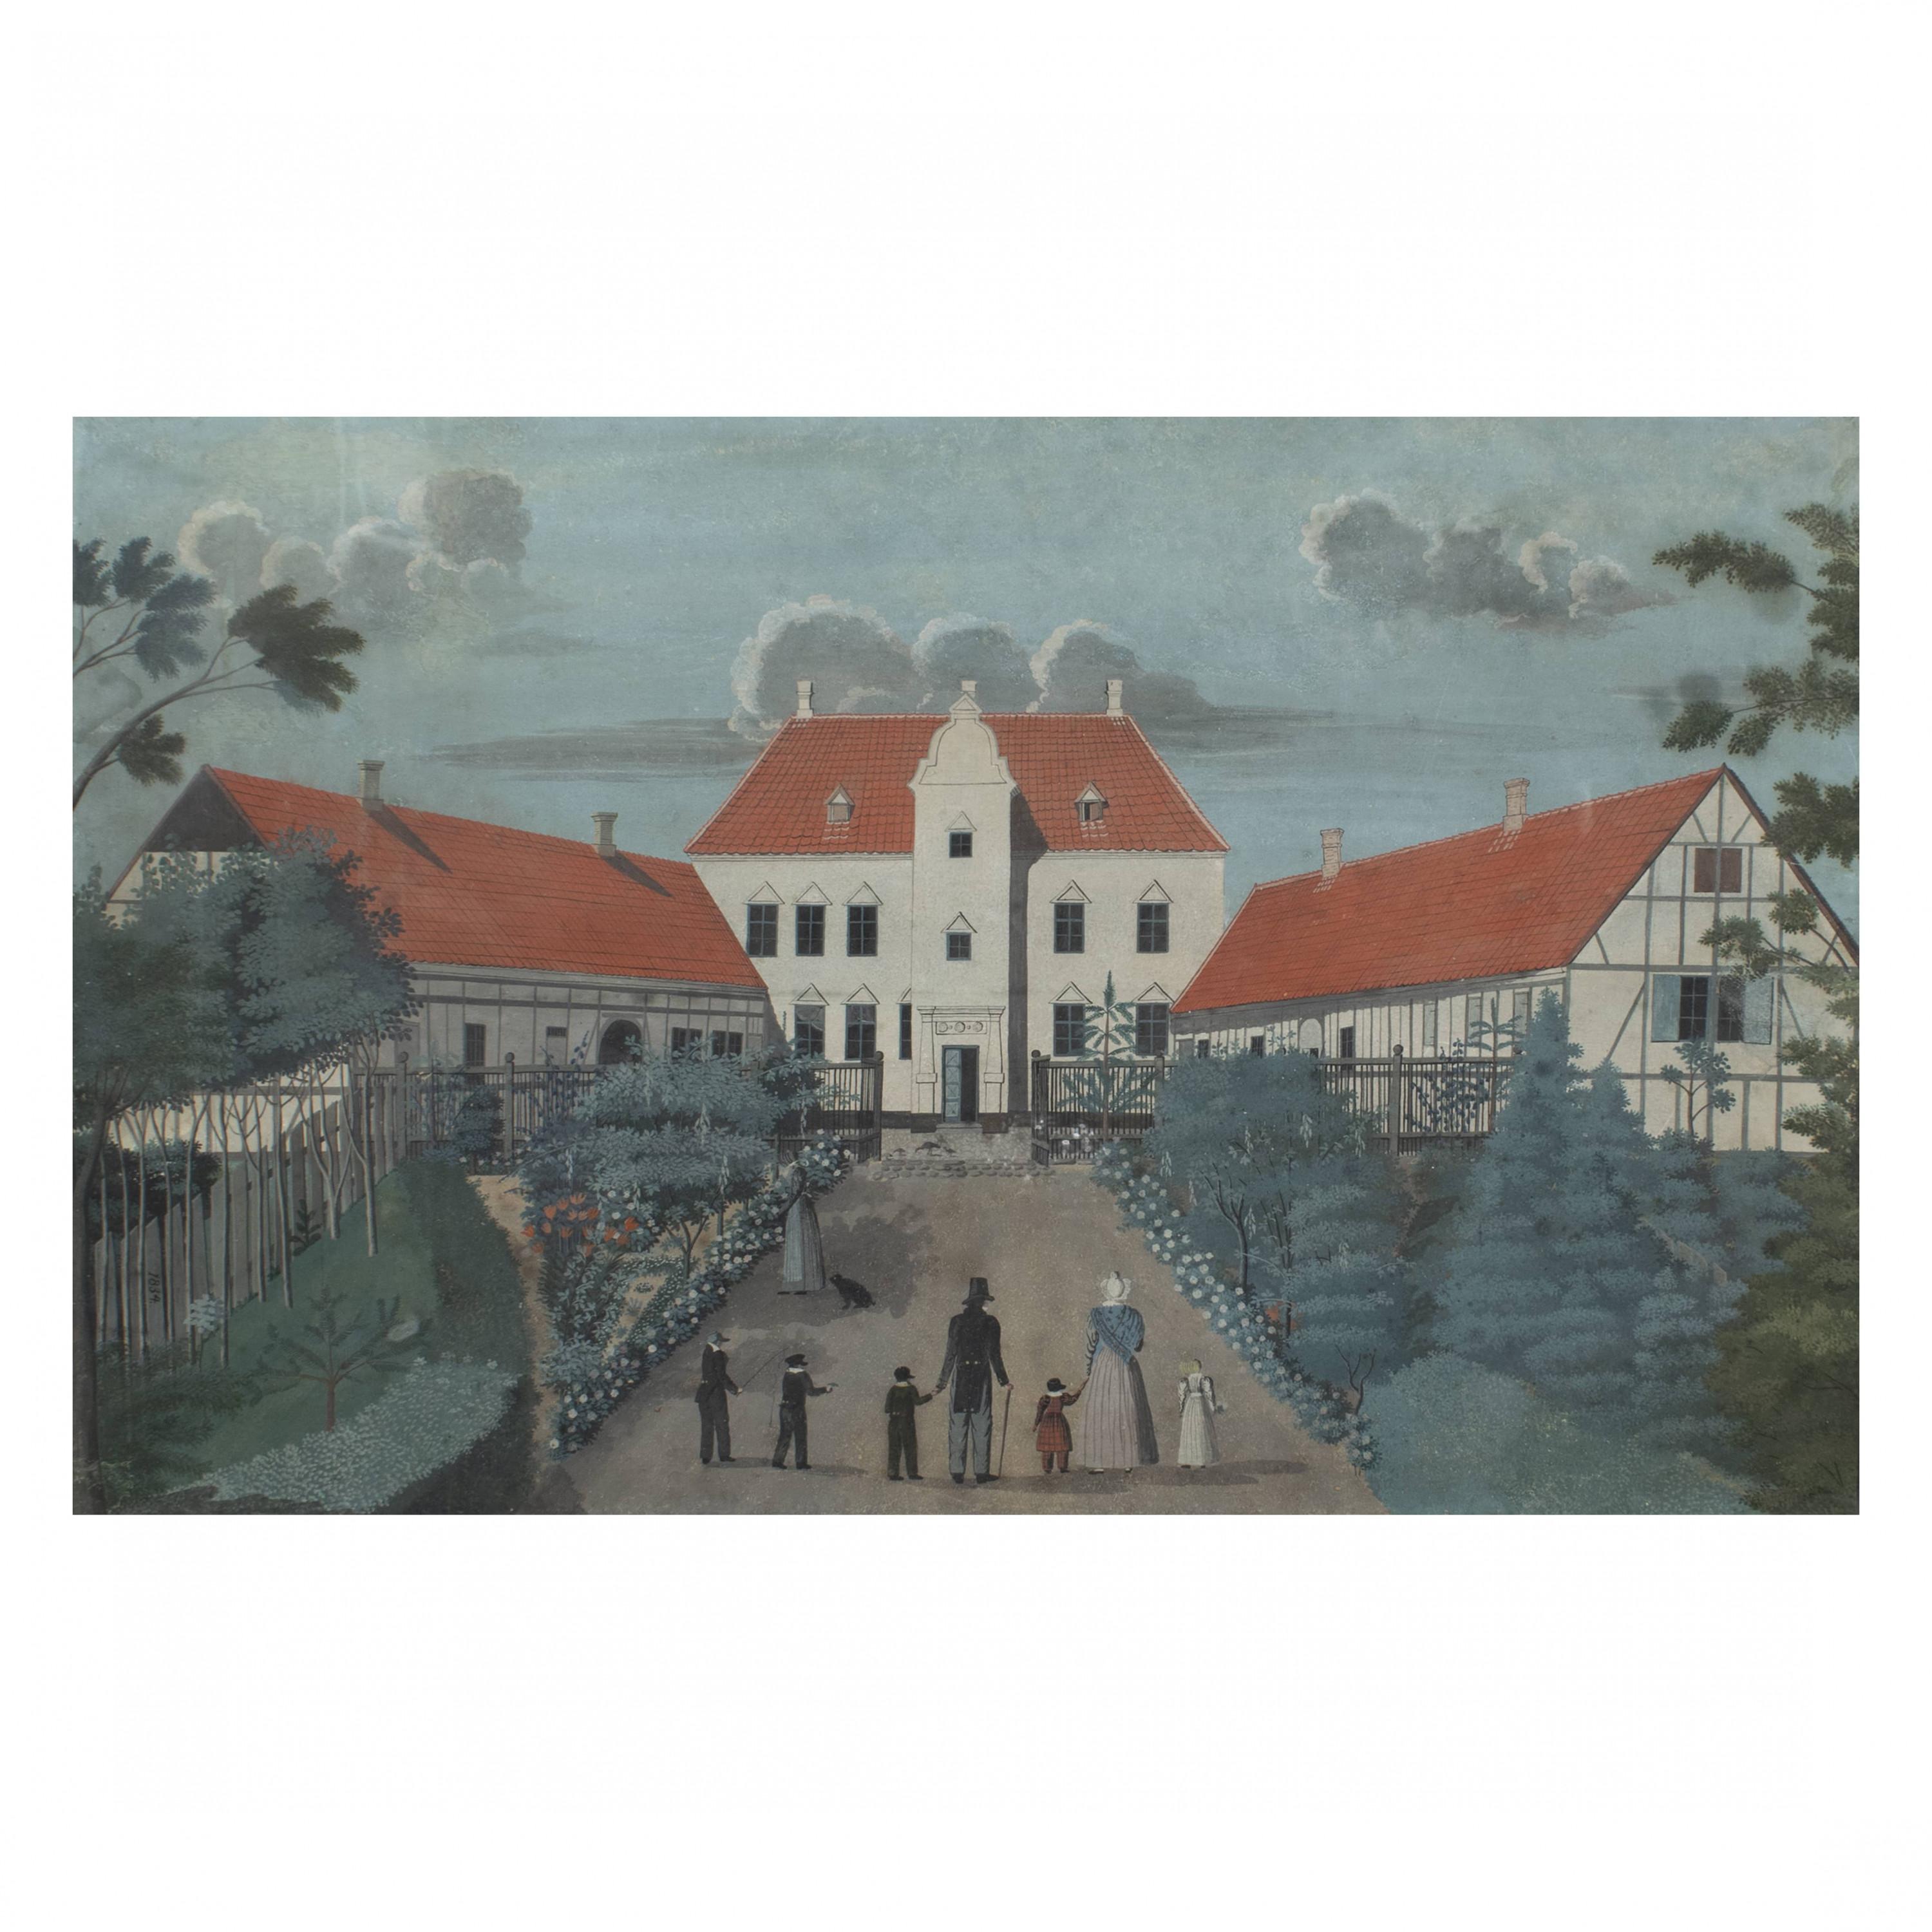 Rare pair of gouache paper paintings depicting the Danish manor house 'Bratskov', early 19th century.
Presented in the original frames in ebonized wood with silver leaf finish.

With frame: 41 x 63 cm. - without frame: 35 x 56 cm.